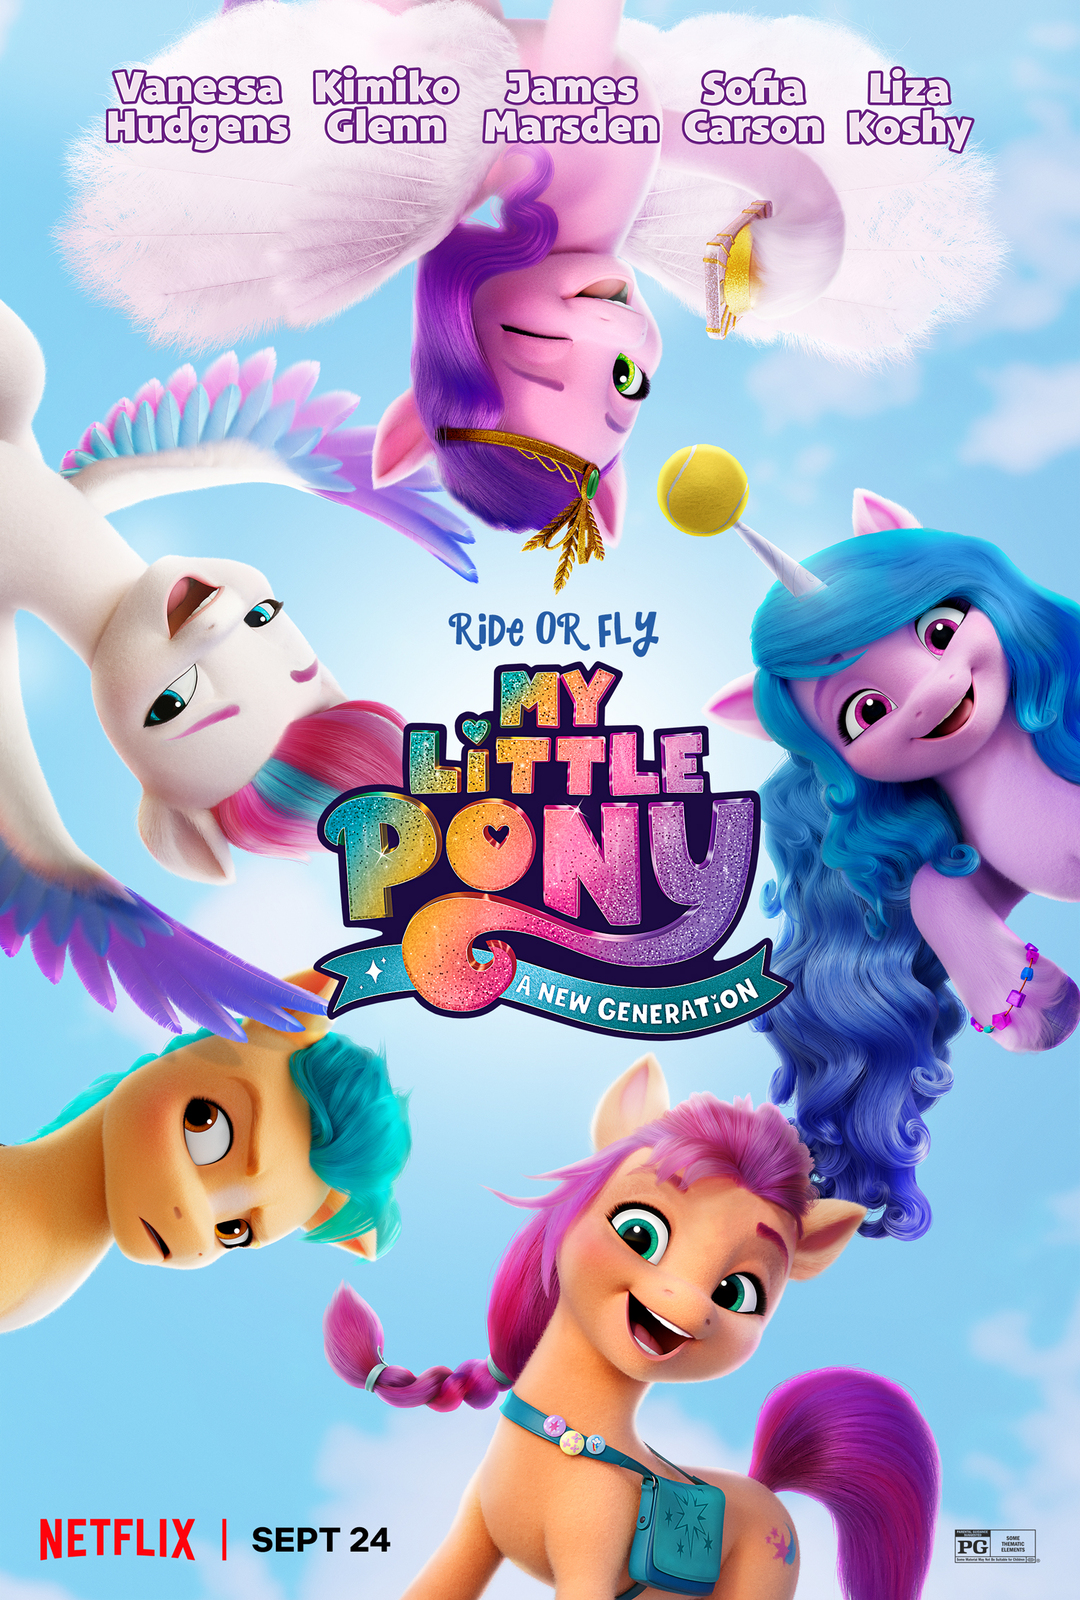 My Little Pony A New Generation Poster Animated Movie Art Film Print 27x40 24x36